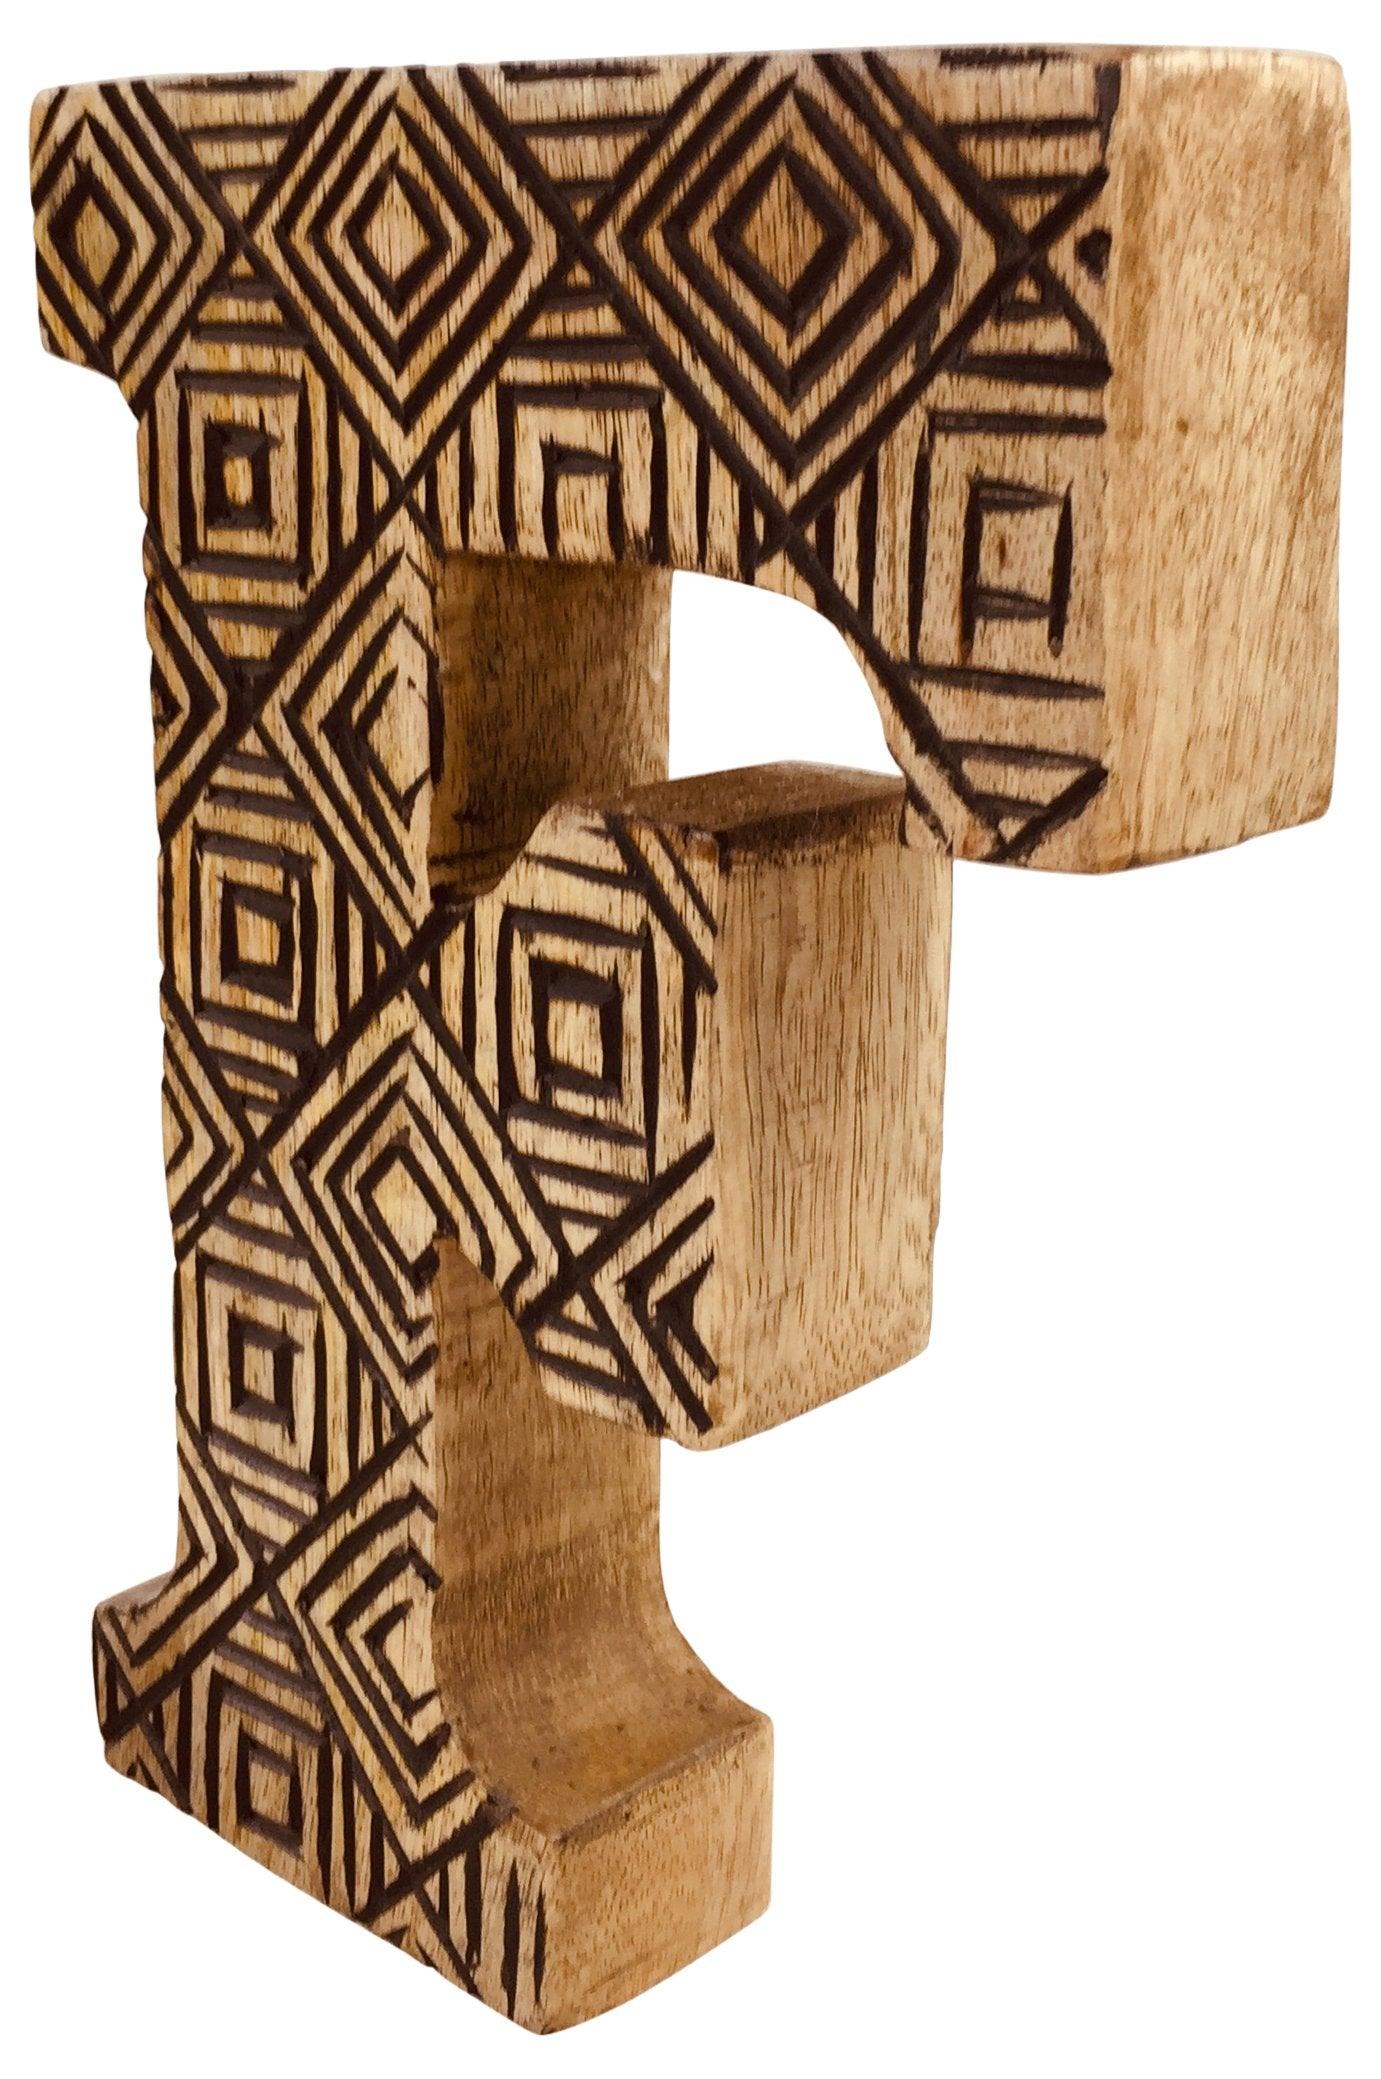 Hand Carved Wooden Geometric Letter F - £12.99 - Single Letters 